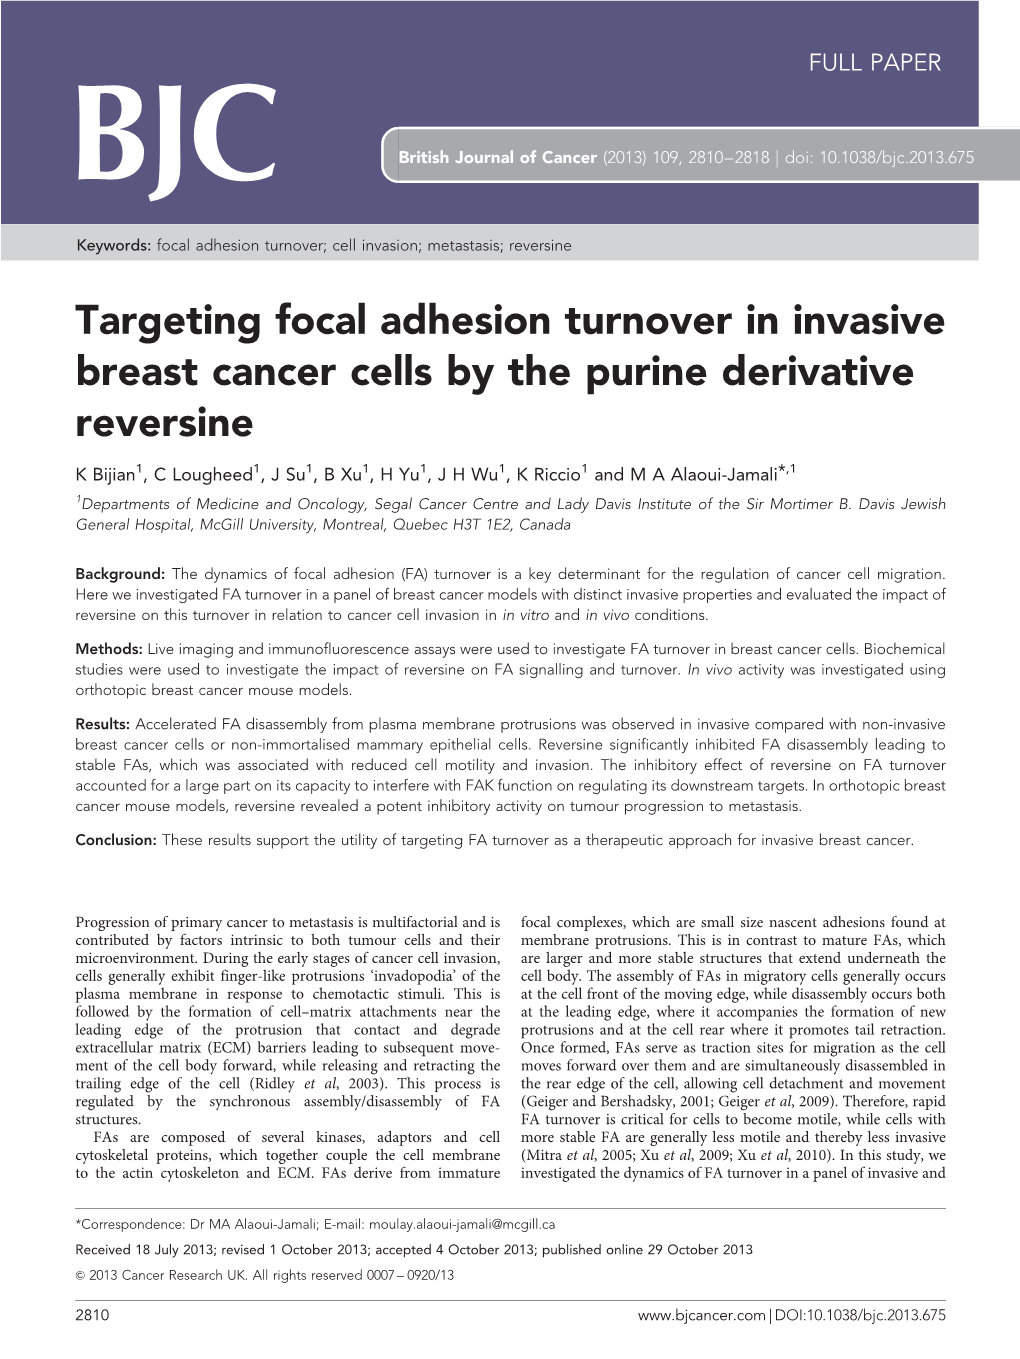 Targeting Focal Adhesion Turnover in Invasive Breast Cancer Cells by the Purine Derivative Reversine